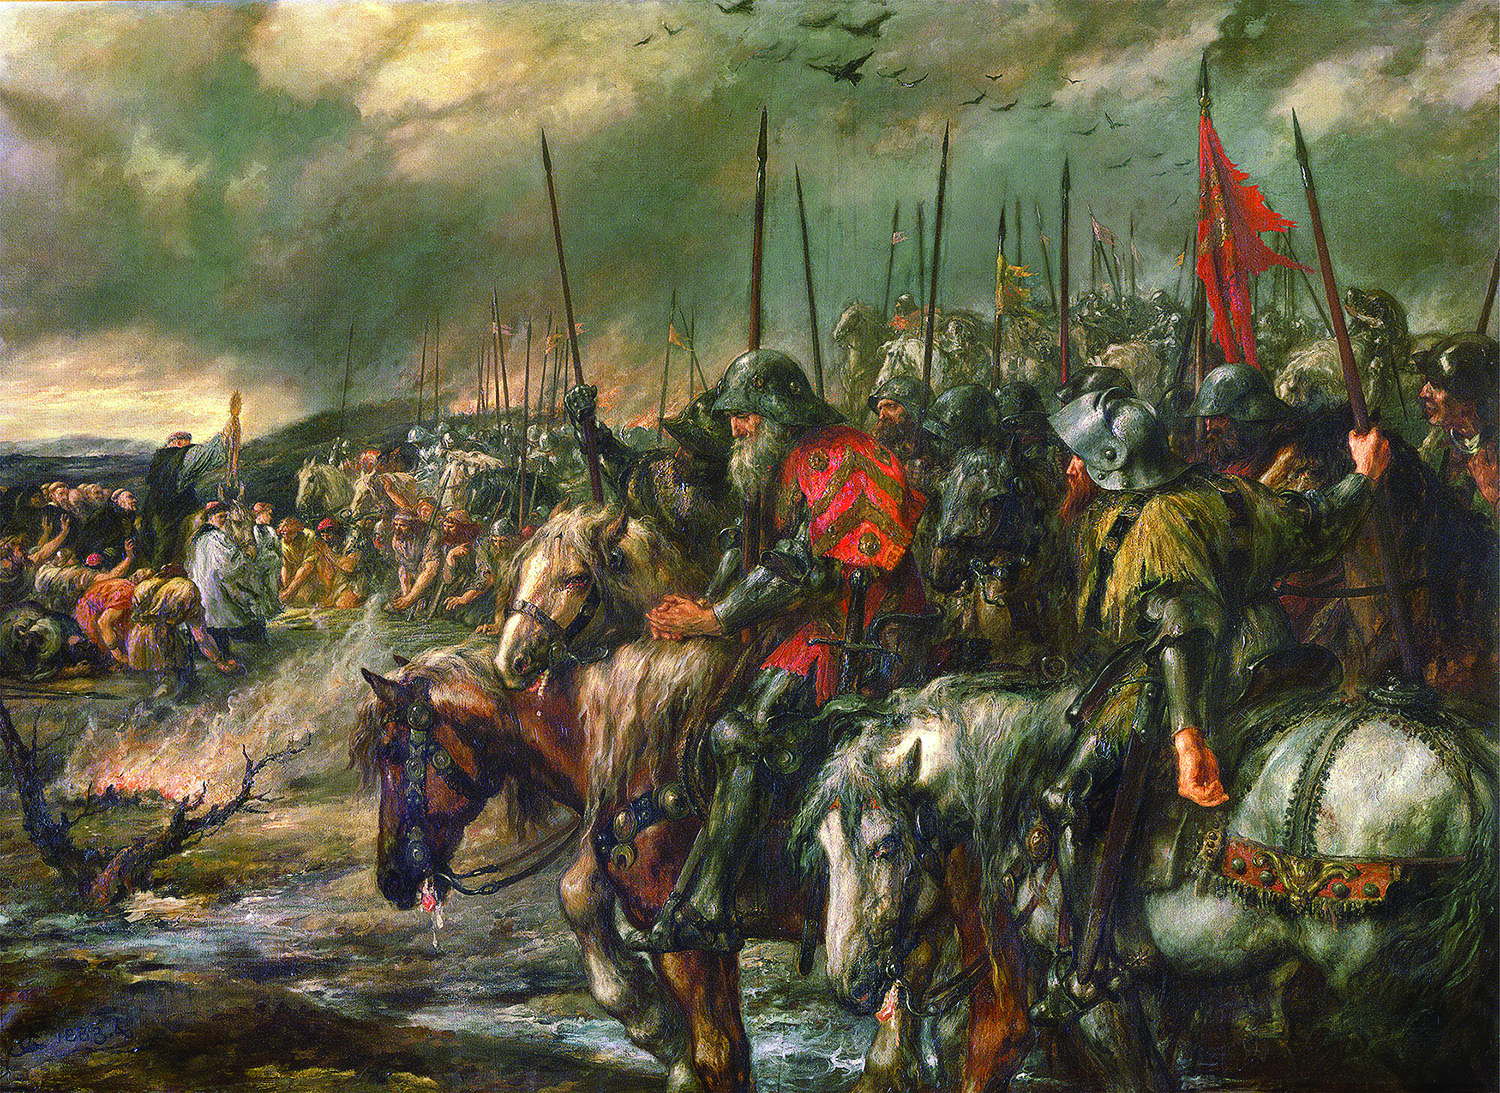  Morning of the Battle of Agincourt, 25 October 1415, painted by
        Sir John Gilbert in the 19th century.